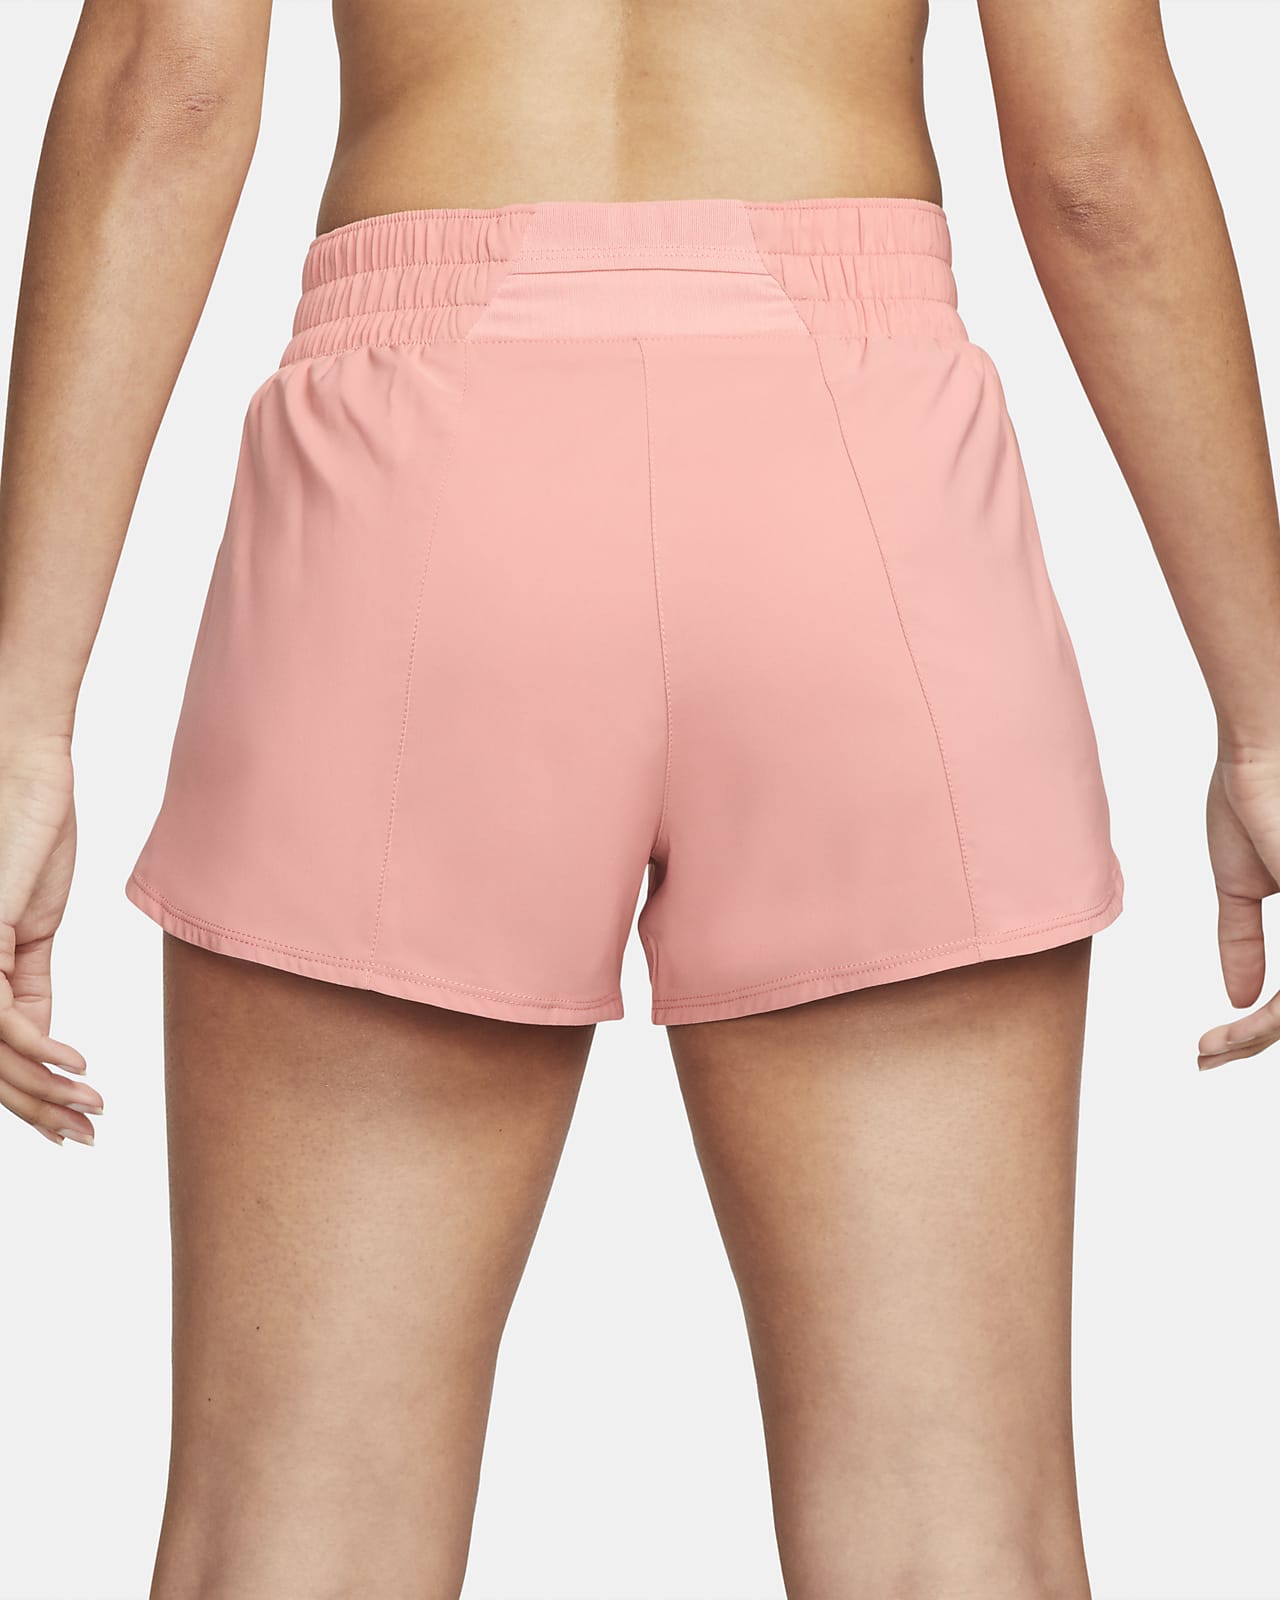 Nike Dri-FIT One Swoosh Women's Mid-Rise Brief-Lined Running Shorts